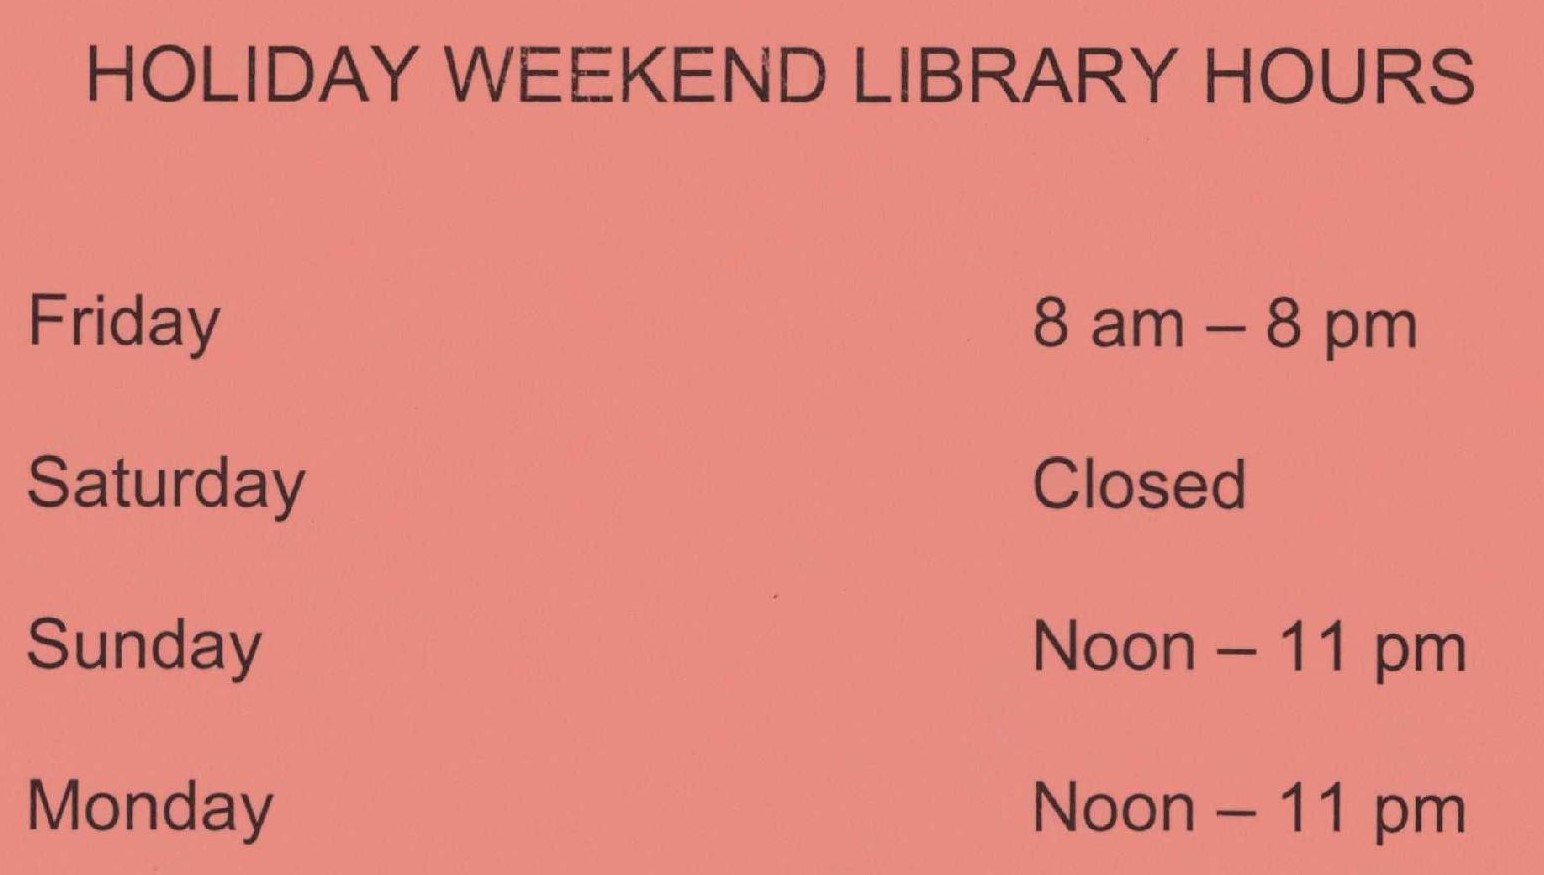 Patriots' Day Weekend Hours